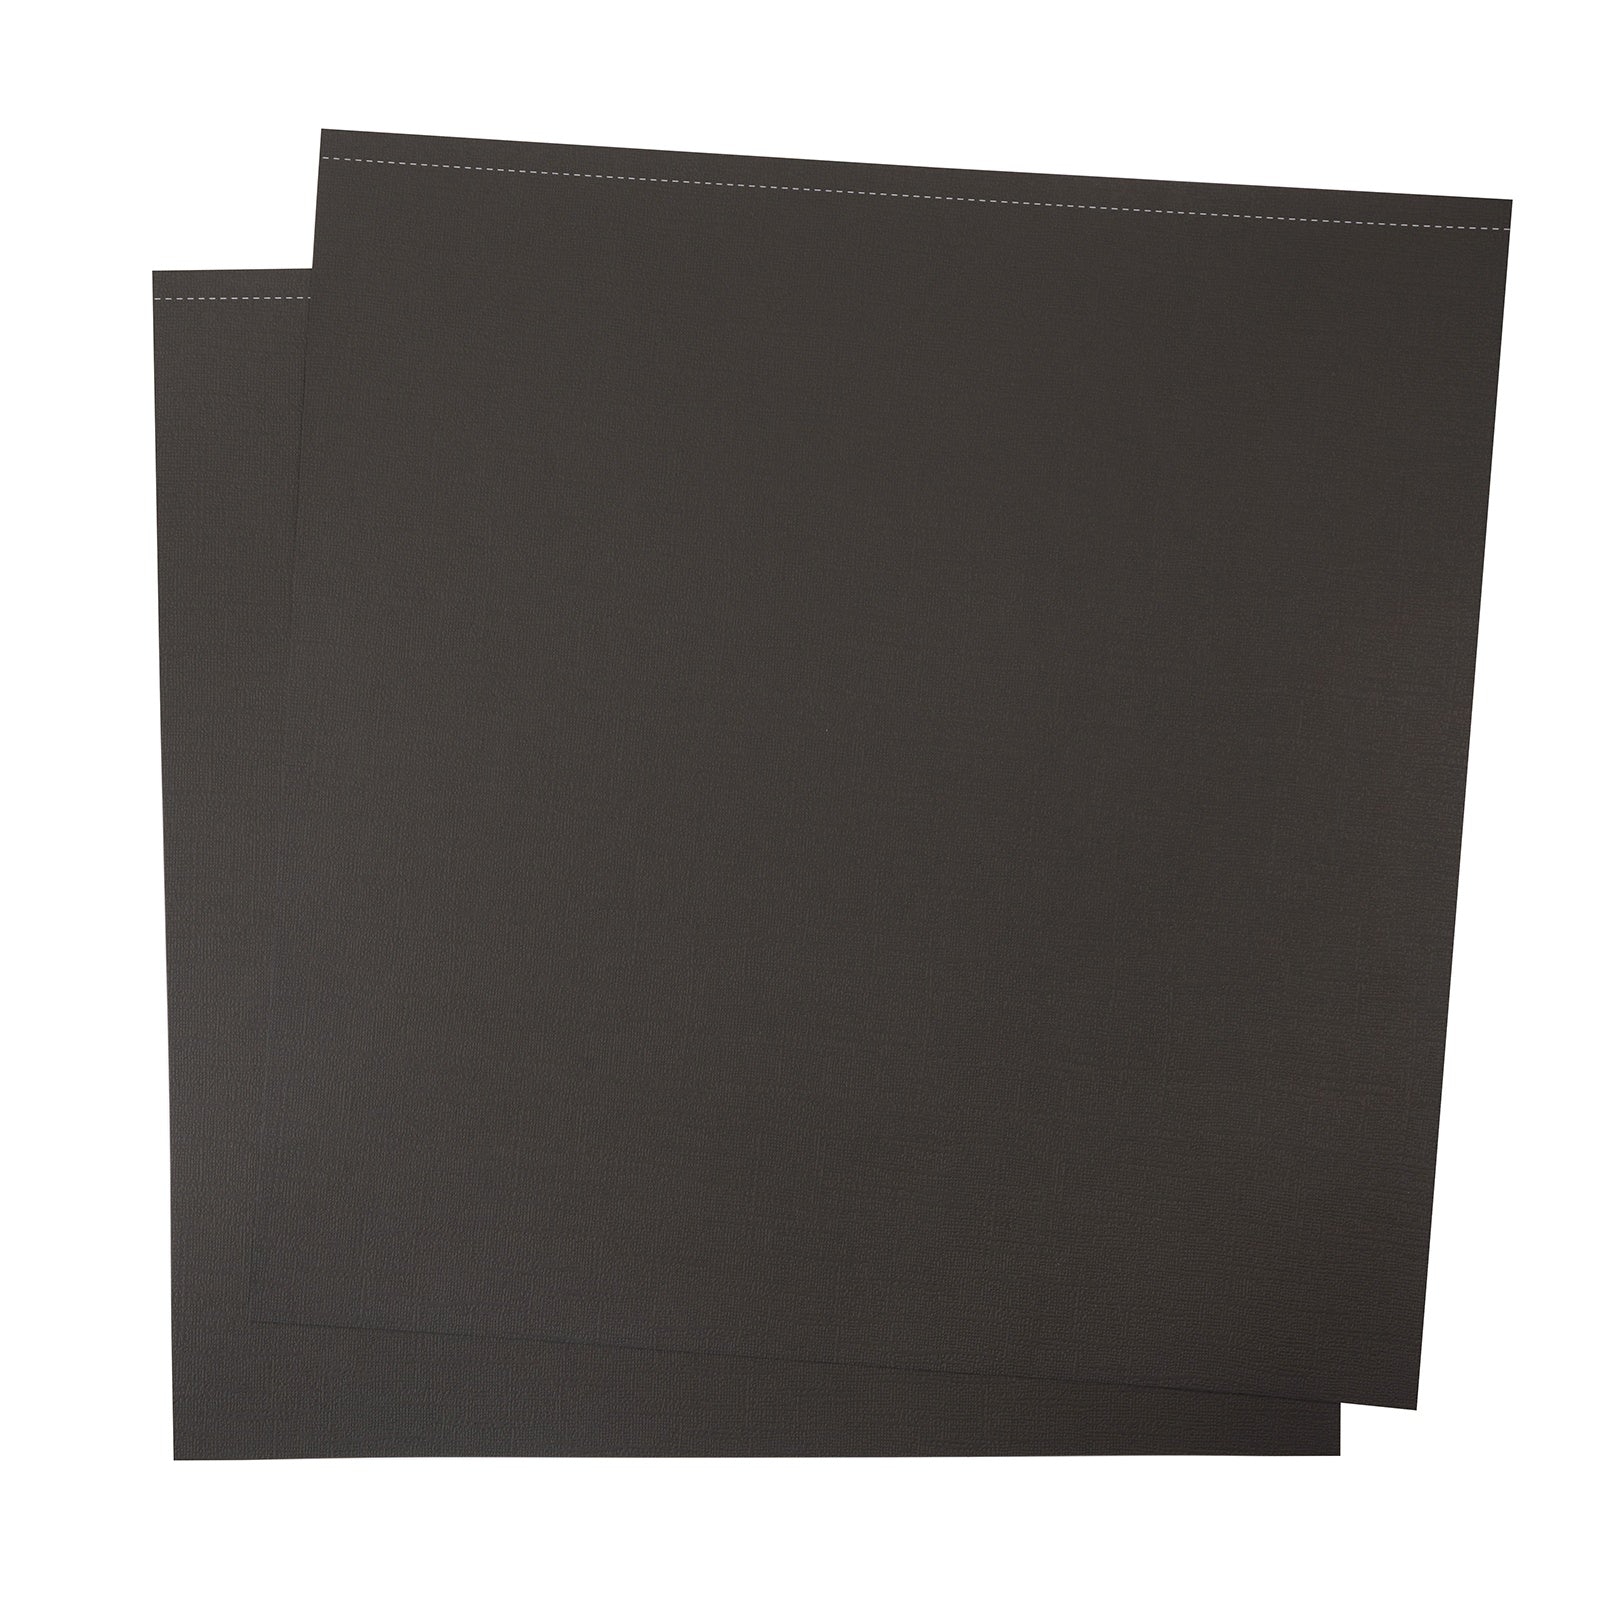 CraftTex Bubbalux Craft Board, Midnight Black, 2 Sheets, Large Size, 20 x  30